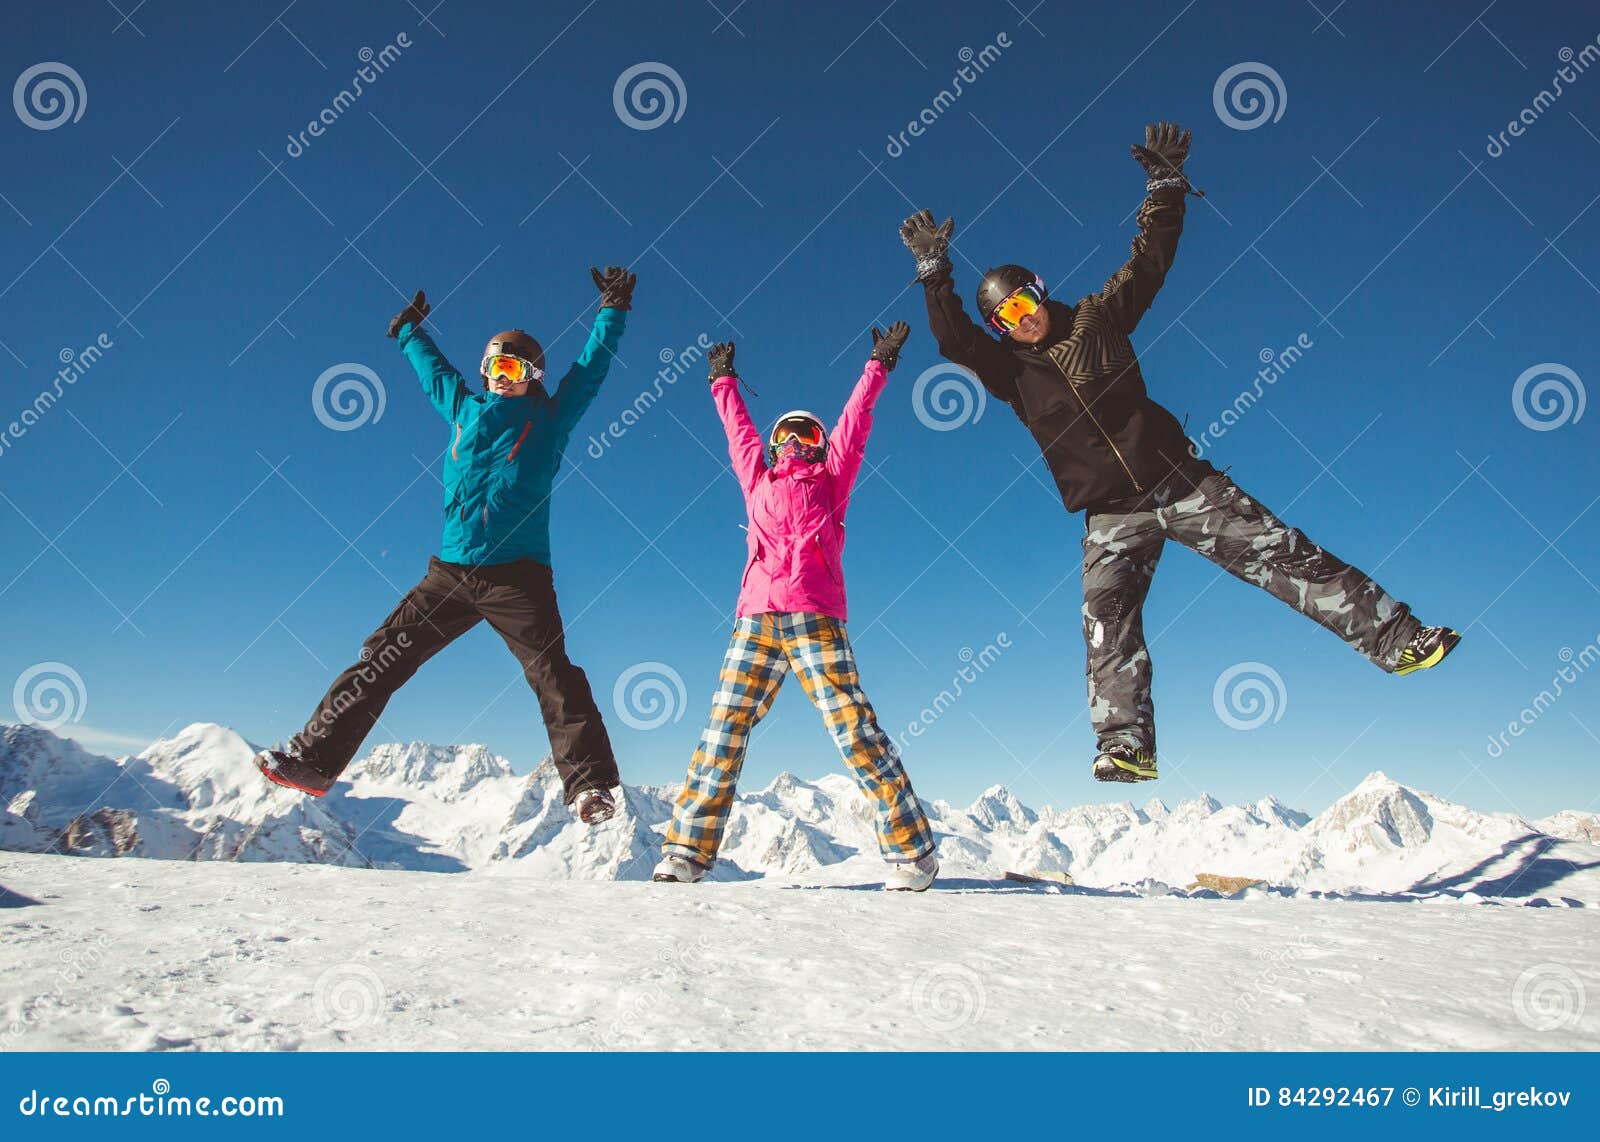 Group Friends Snowboarders Have Fun on the Slope Stock Image - Image of ...